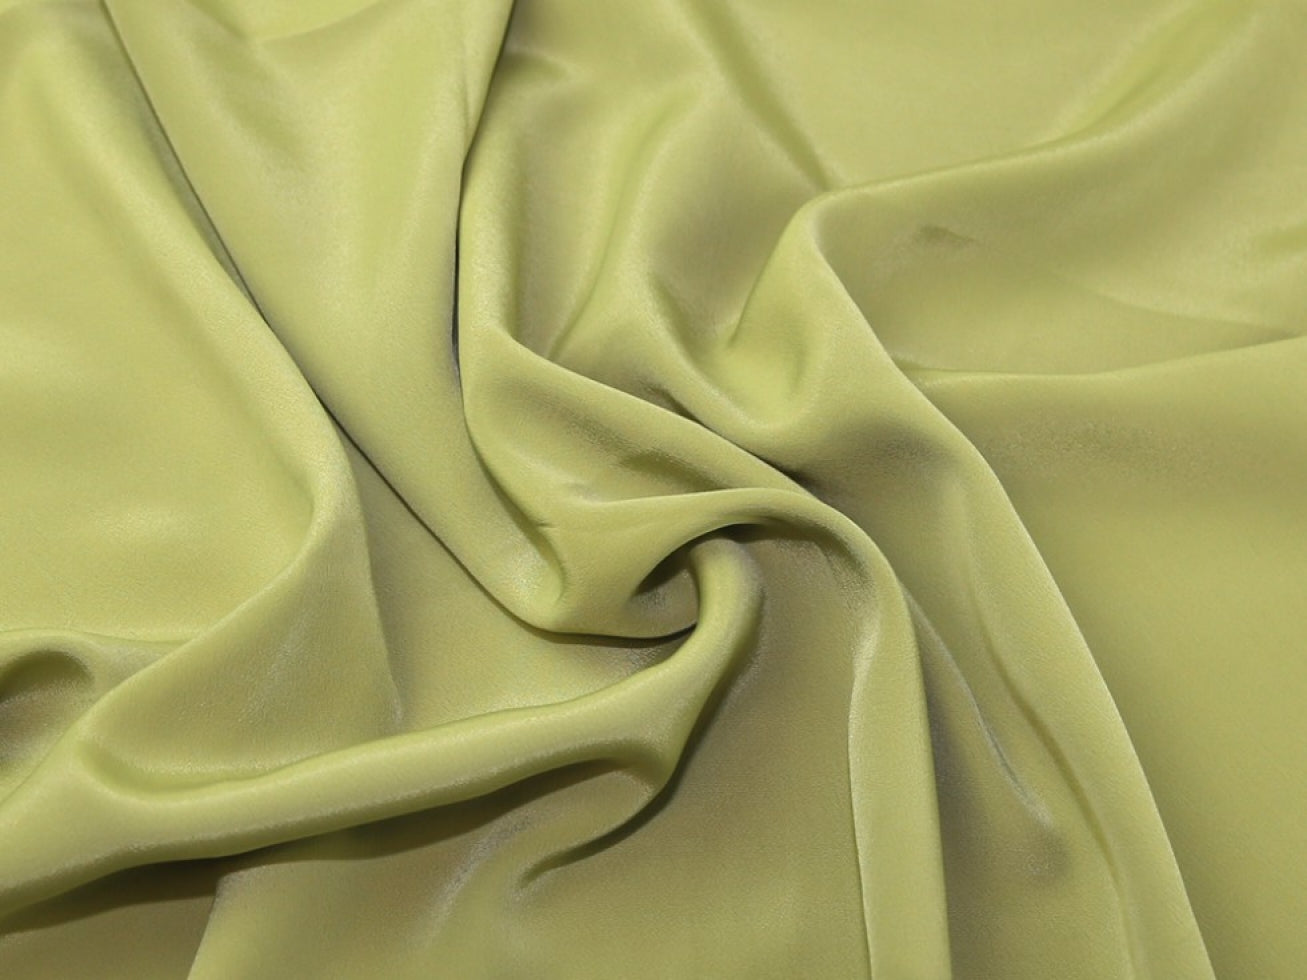 Darbari Smooth Light And Feel Like Feather On Skin Crepe De Chine Fabric- Olive Green